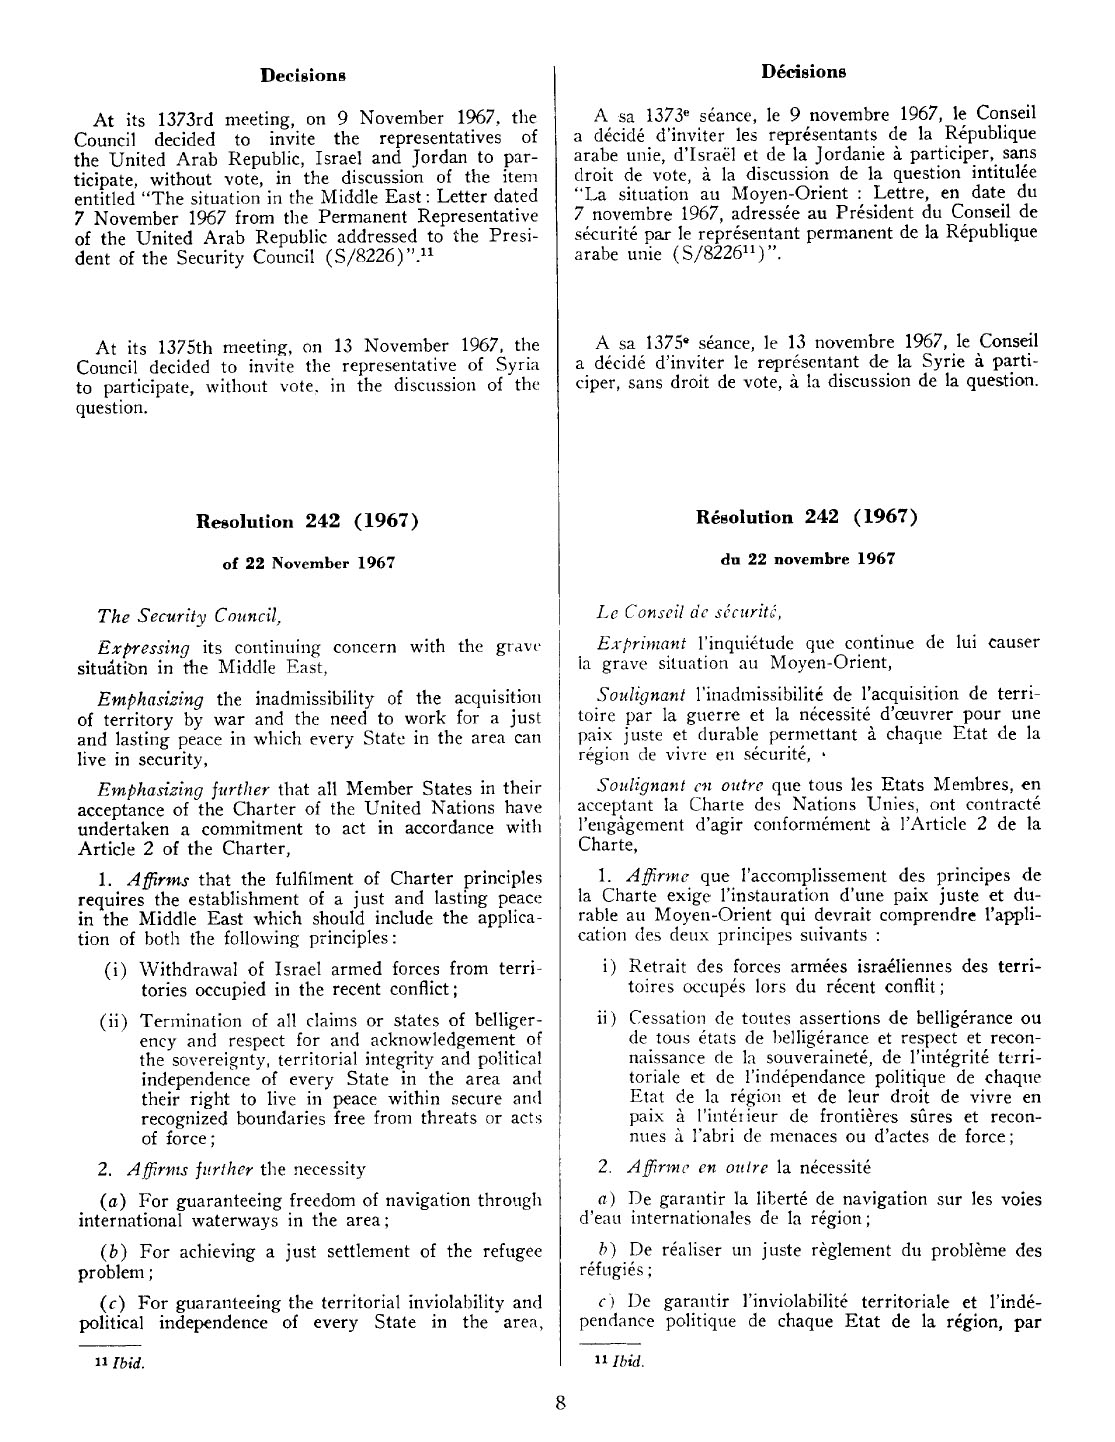 SECURITY COUNCIL RESOLUTIONS – 1967 (Resolution 242) | Shalom Israel